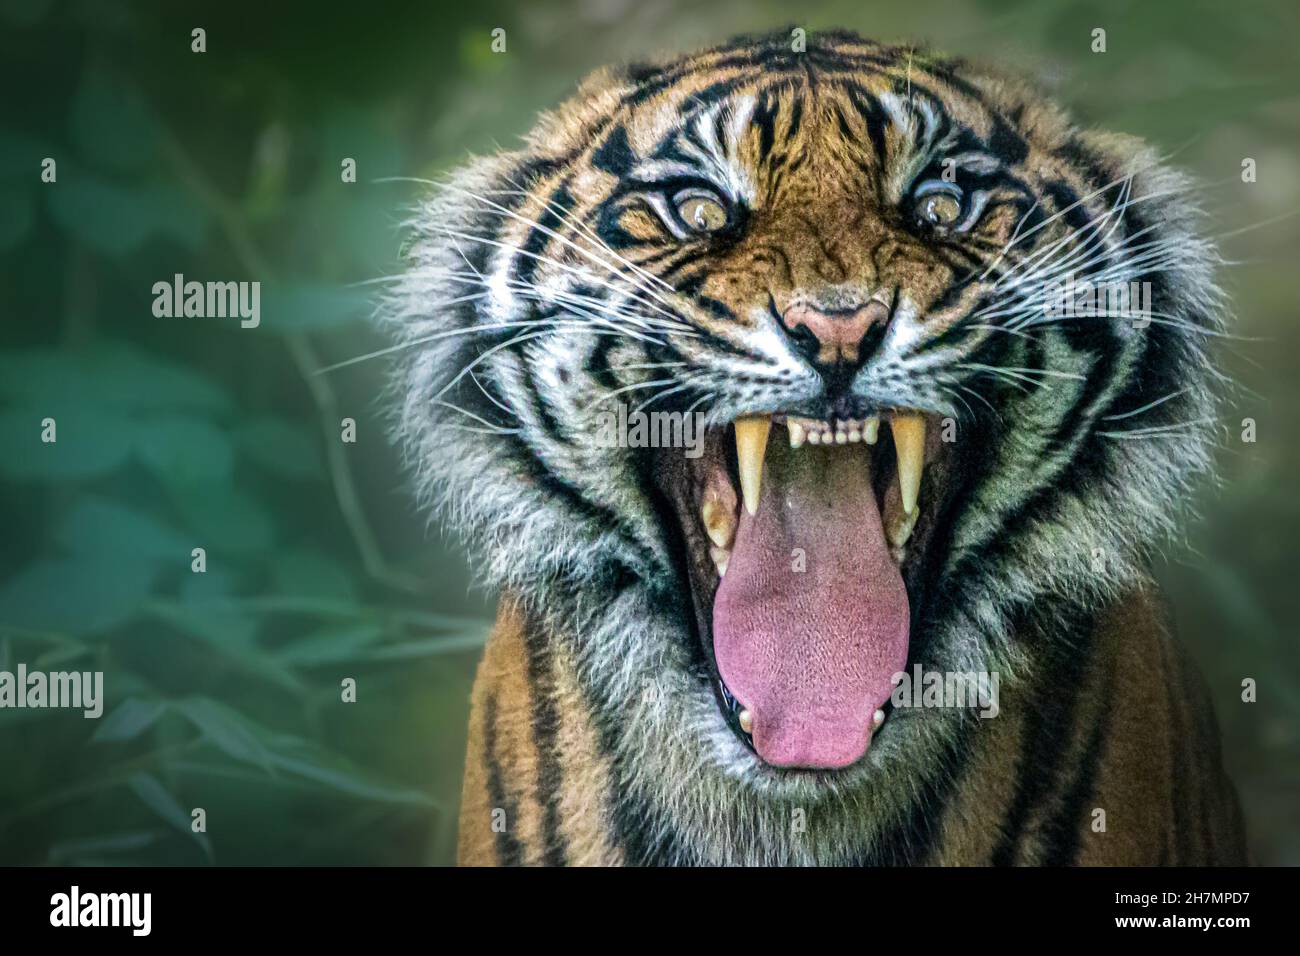 a growling tiger ready to bite Stock Photo